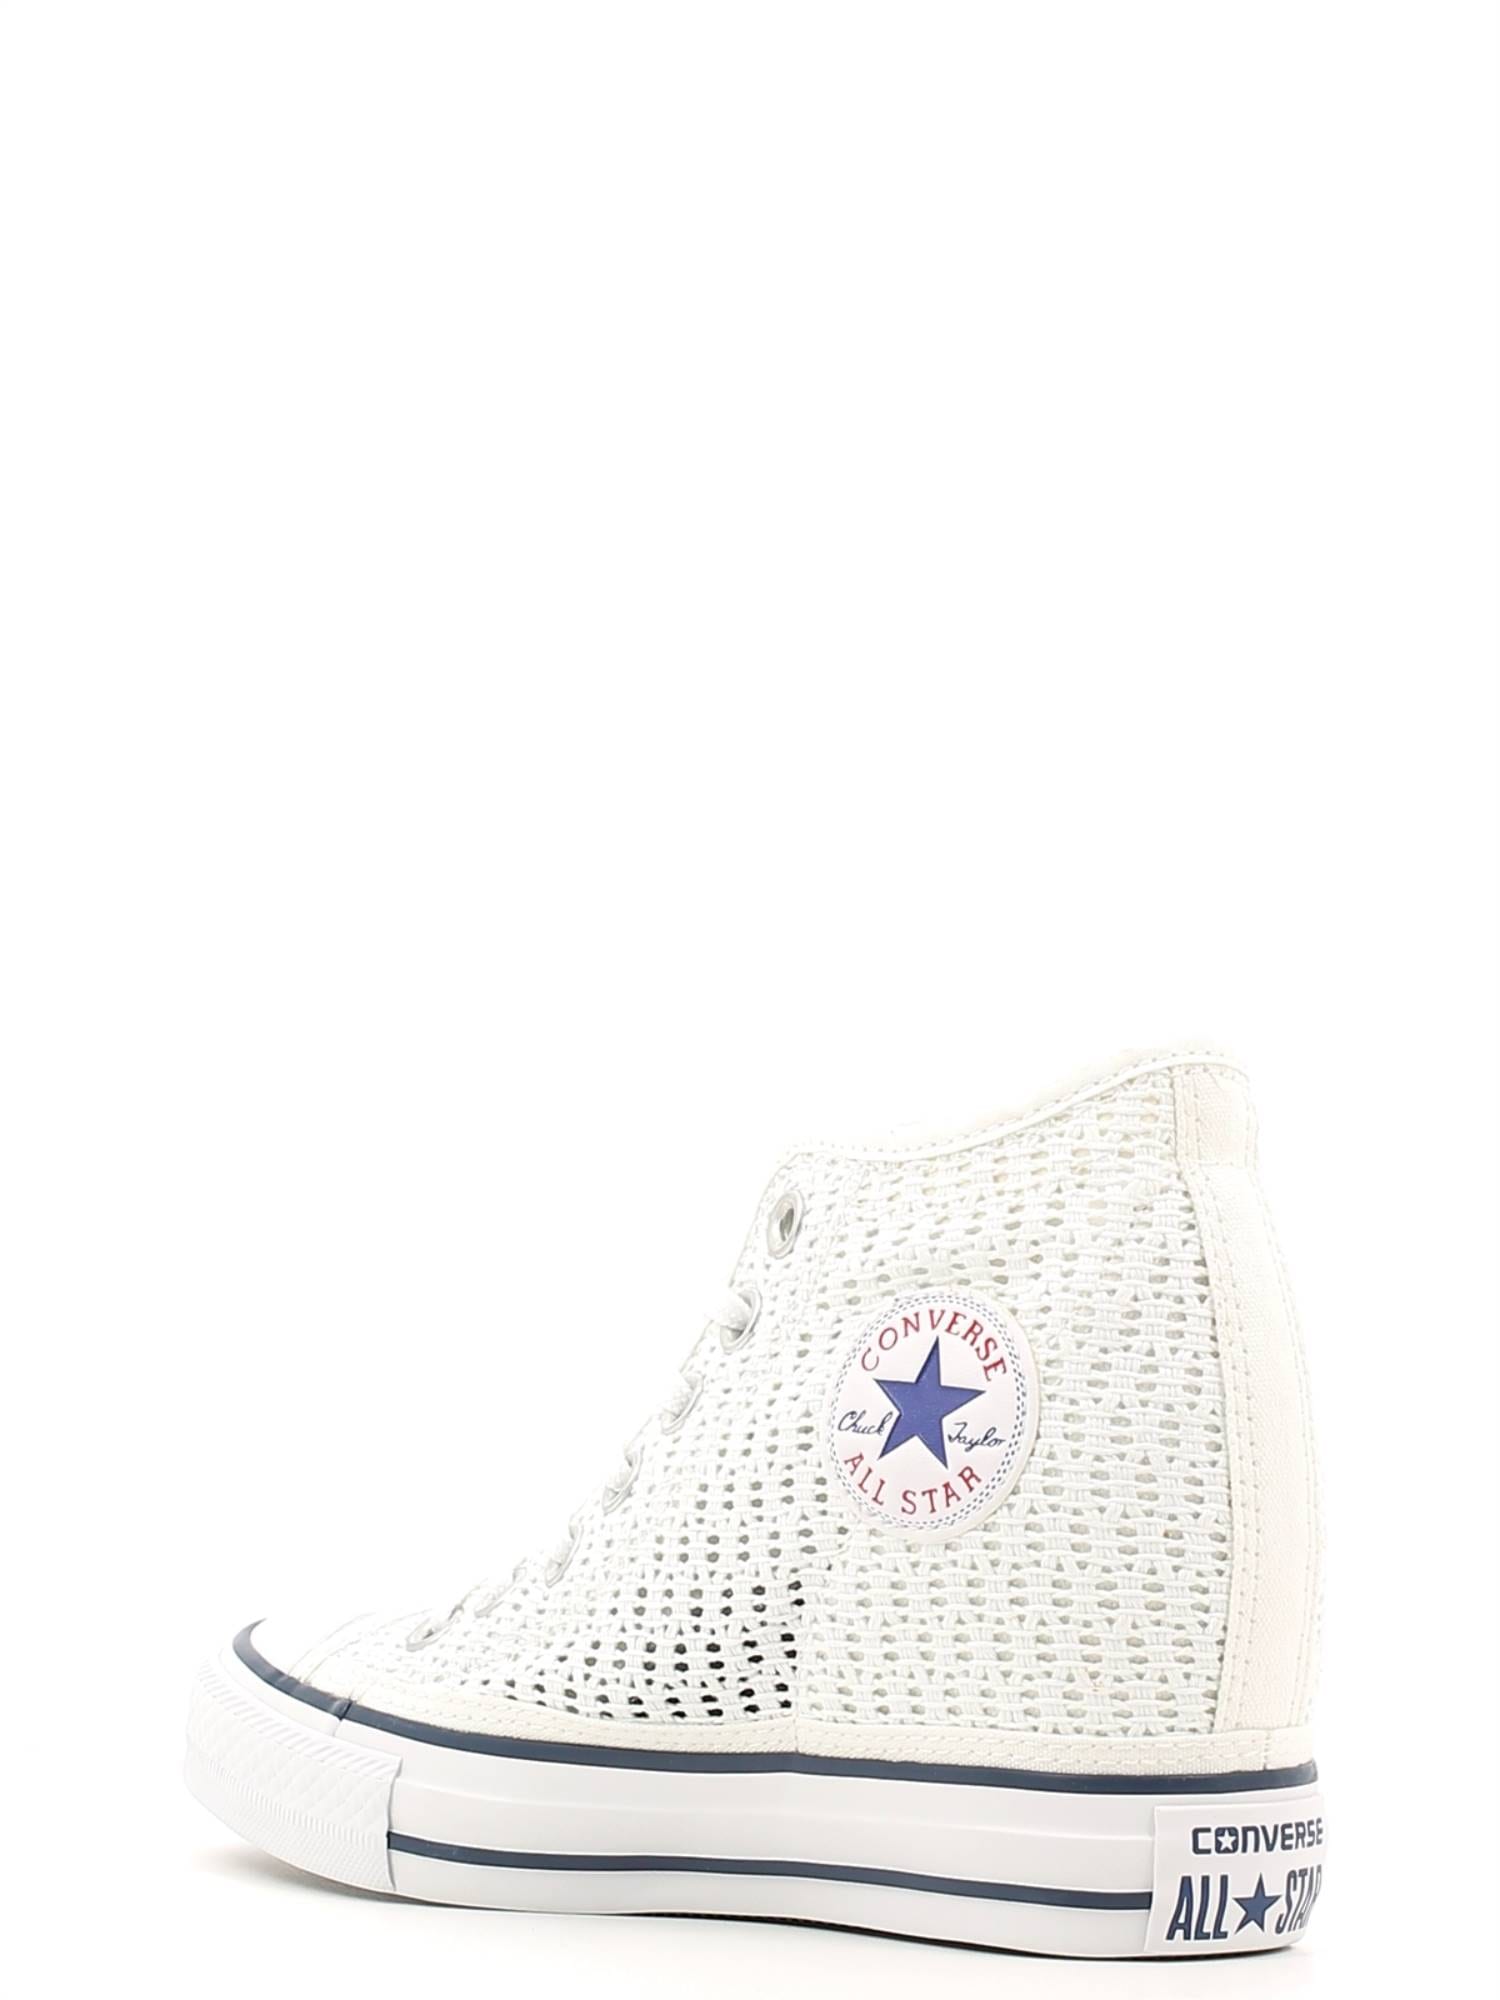 converse all star mid lux tiny